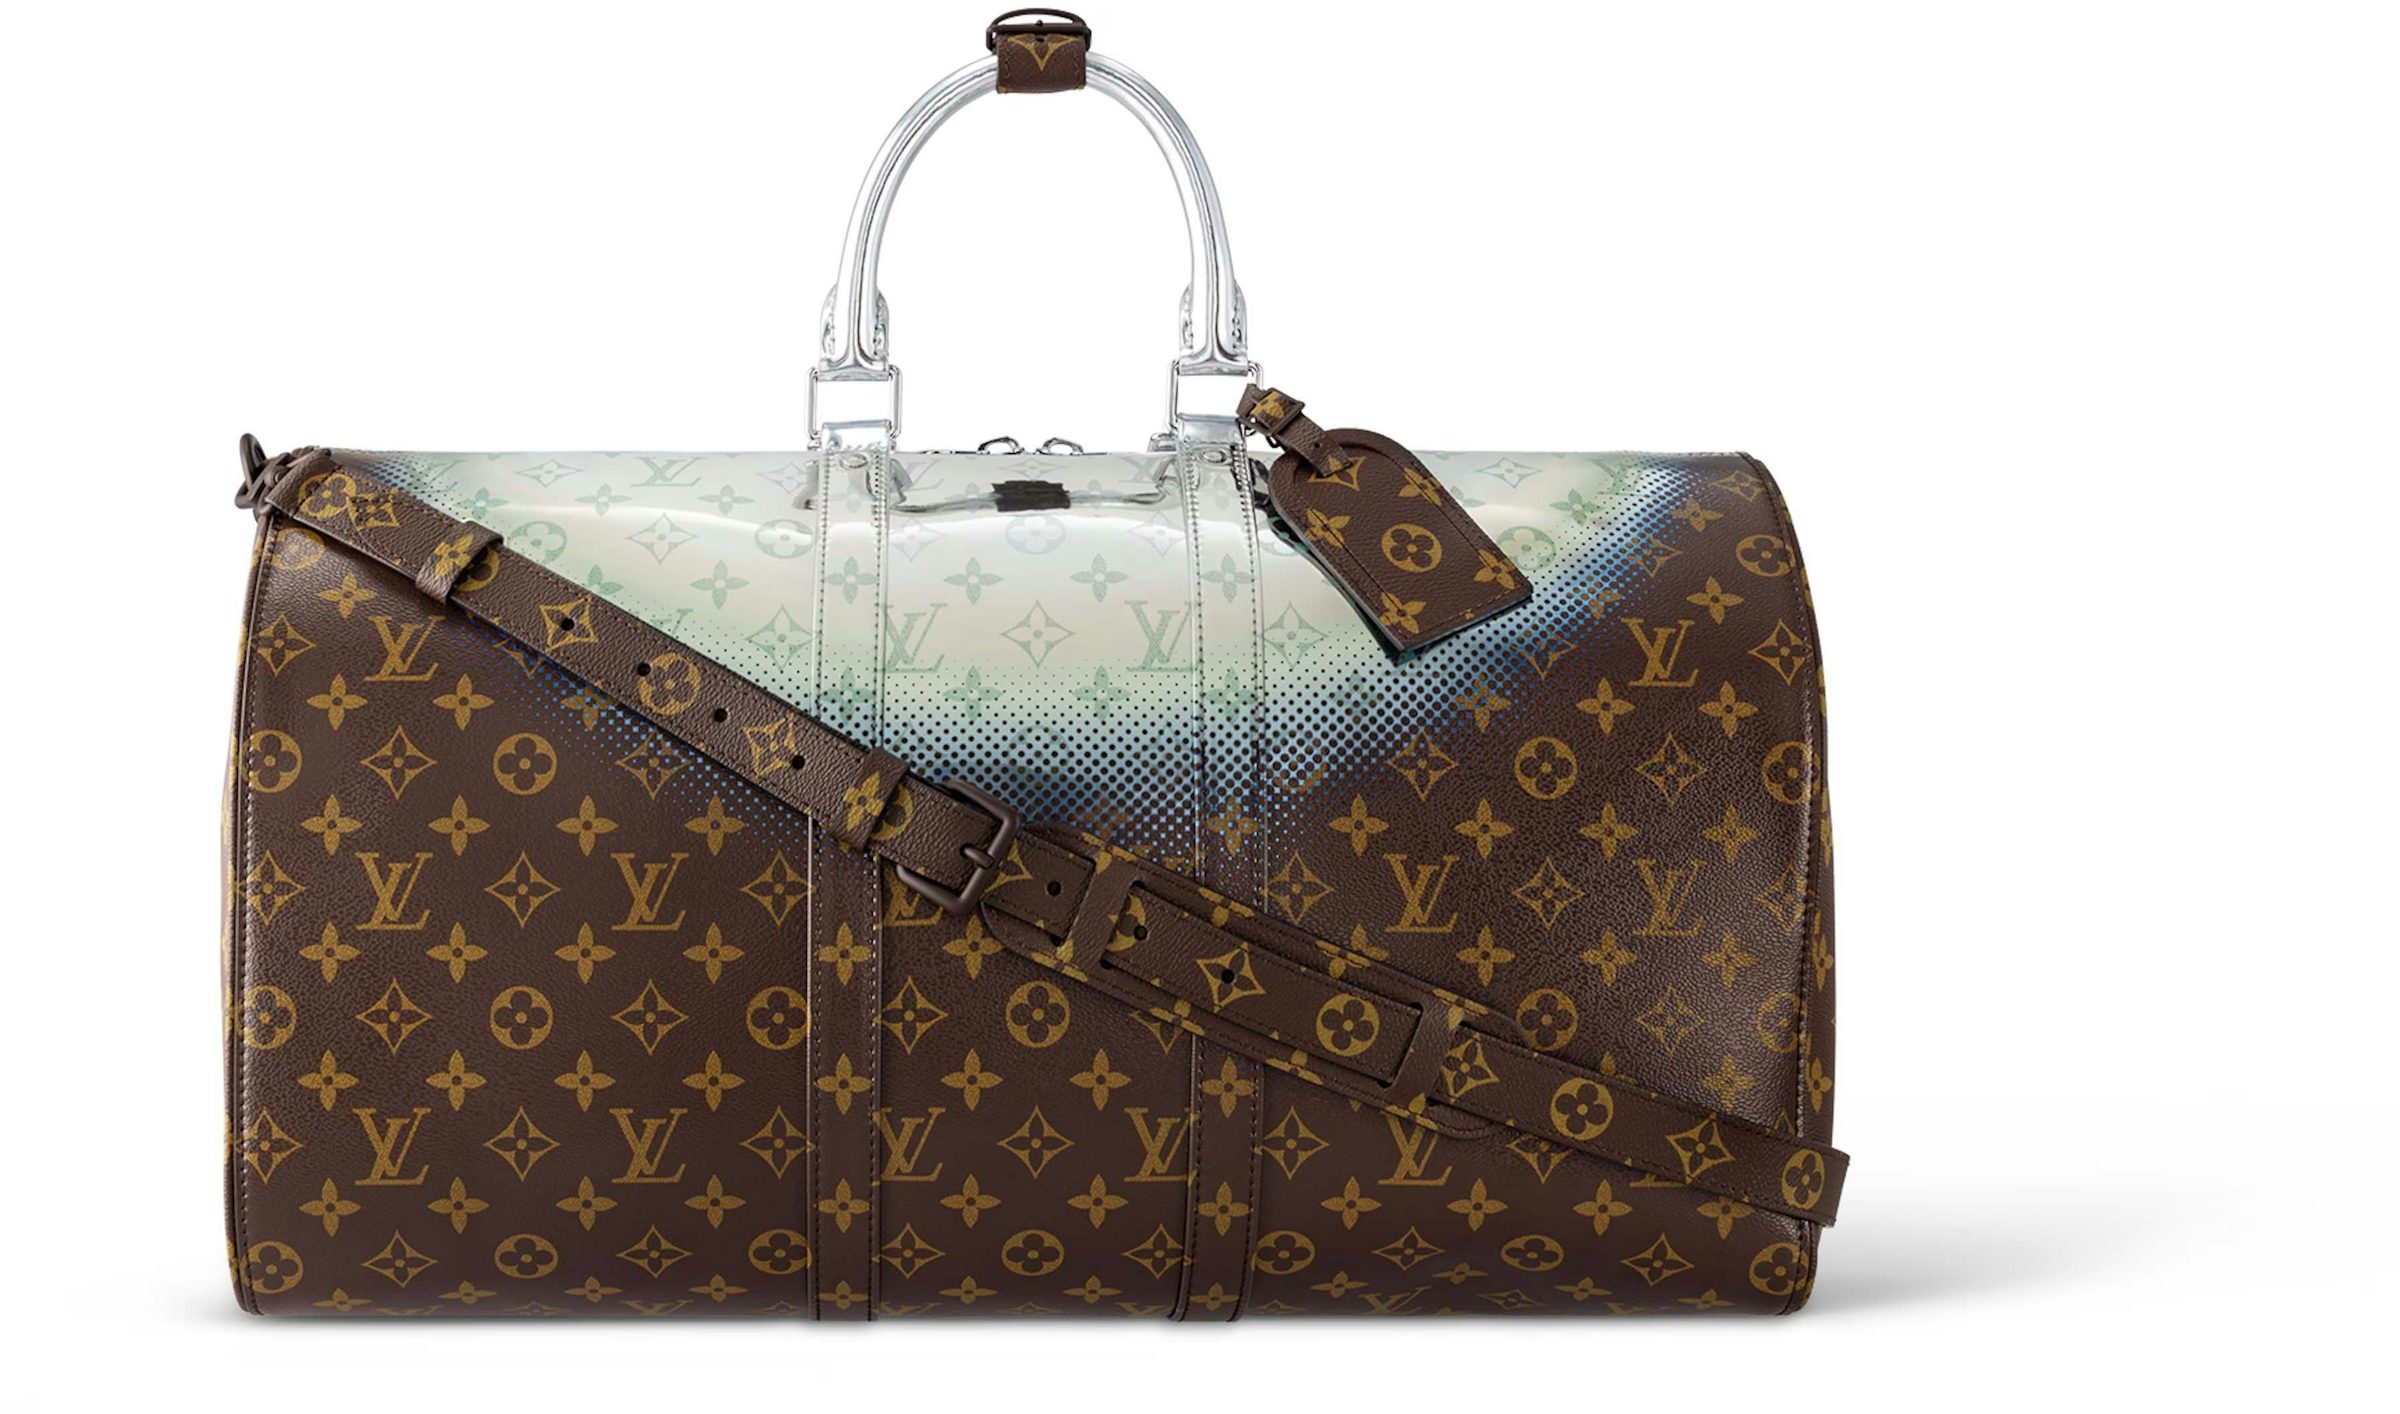 Louis Vuitton Keepall Size Guide in 2023